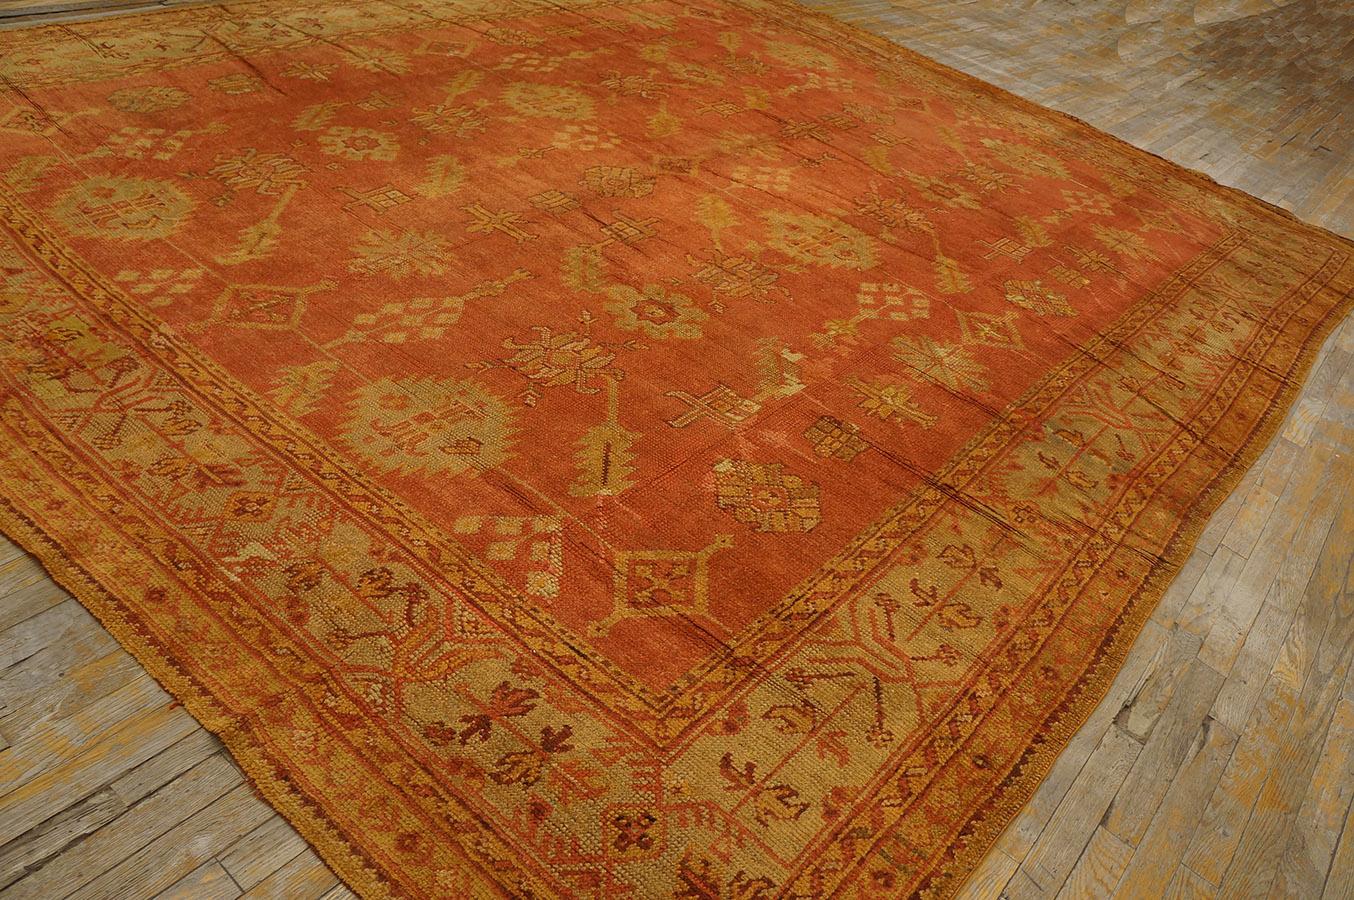 Early 20th Century Turkish Oushak Carpet ( 10'5'' x 12'6'' - 318 x 382 ) For Sale 10